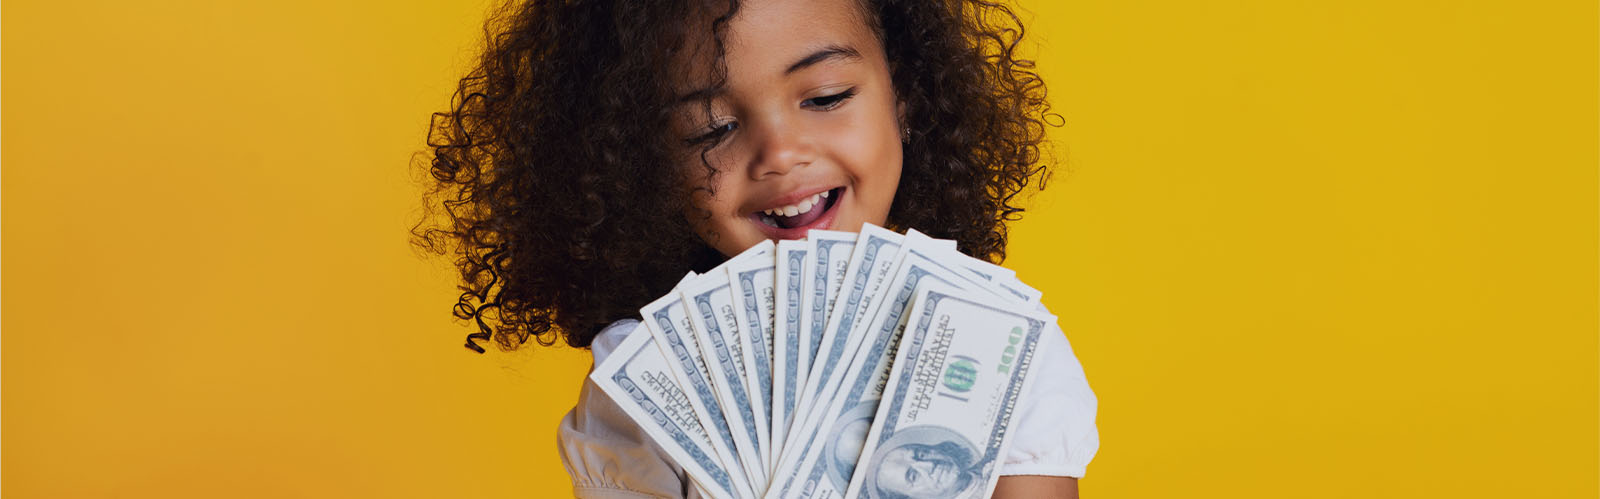 Young girl holding lots of cash